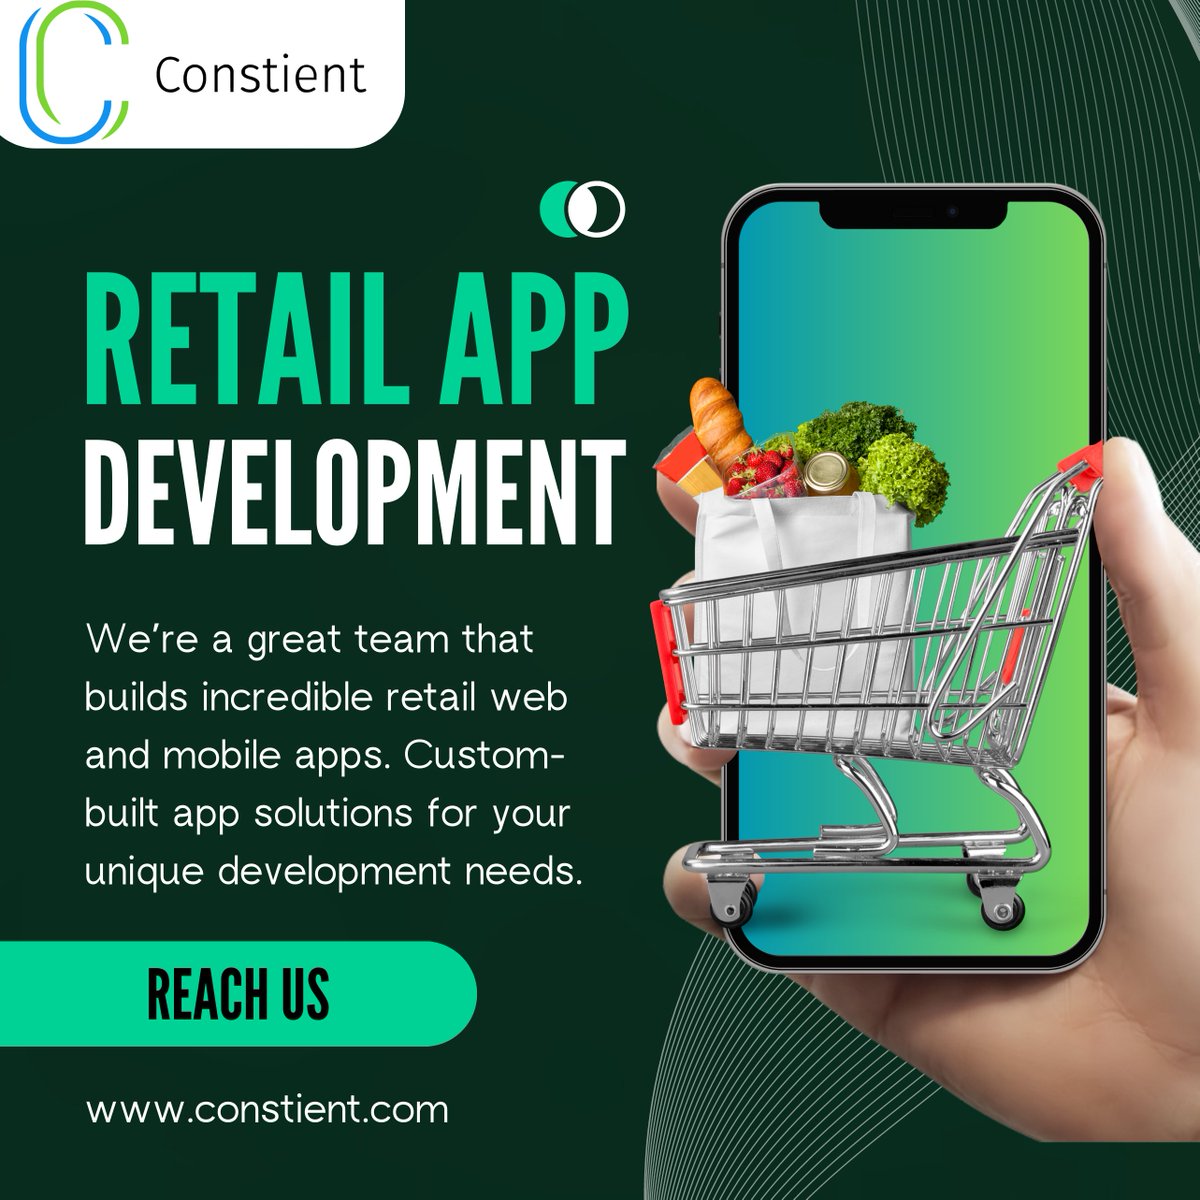 Get the best-in-class retail app developers to create amazing solutions for your business or startup. Bring your ideas to life by embracing the digital transformation with your company.

Reach Us - bit.ly/3HSUXx0

#MobileAppDevelopmentCompany #MobileApp #RetailMobileApp